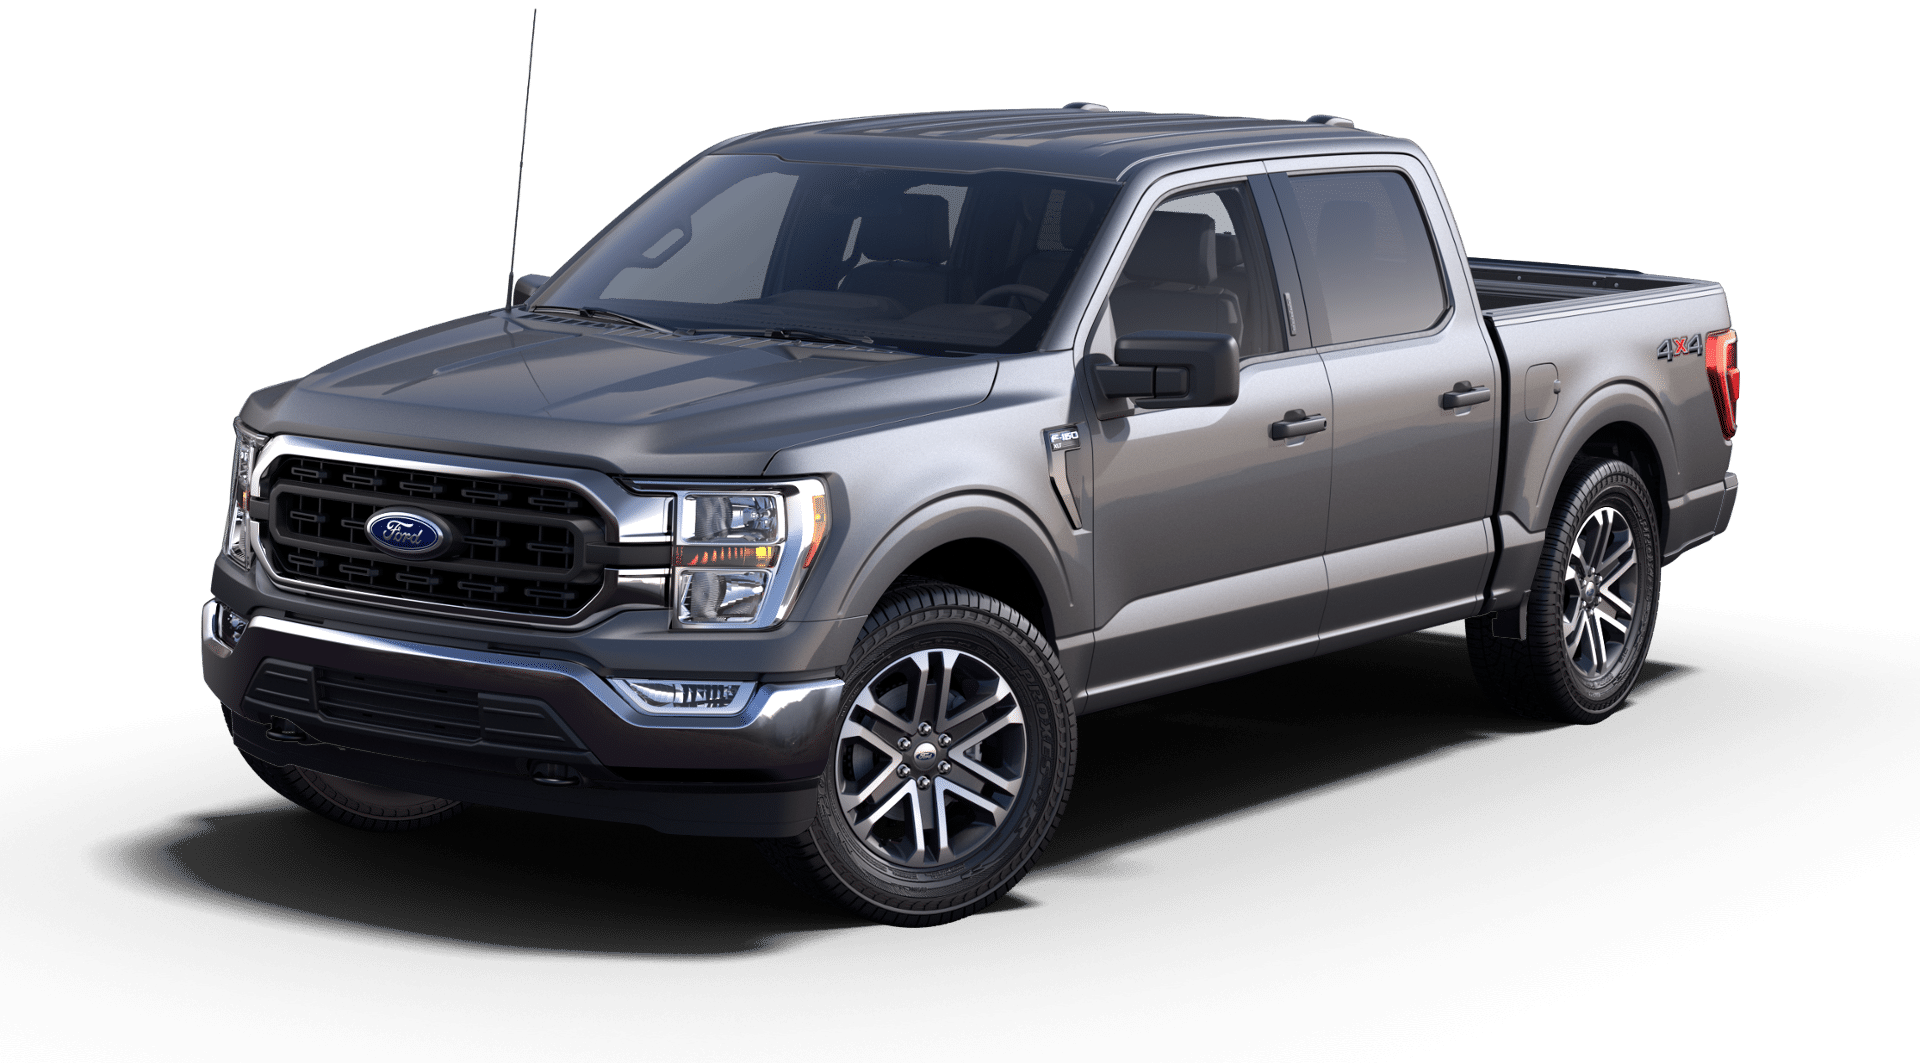 2023 Ford F-150 XLT - Includes XLT Standard Features, Plus:<br/>? 